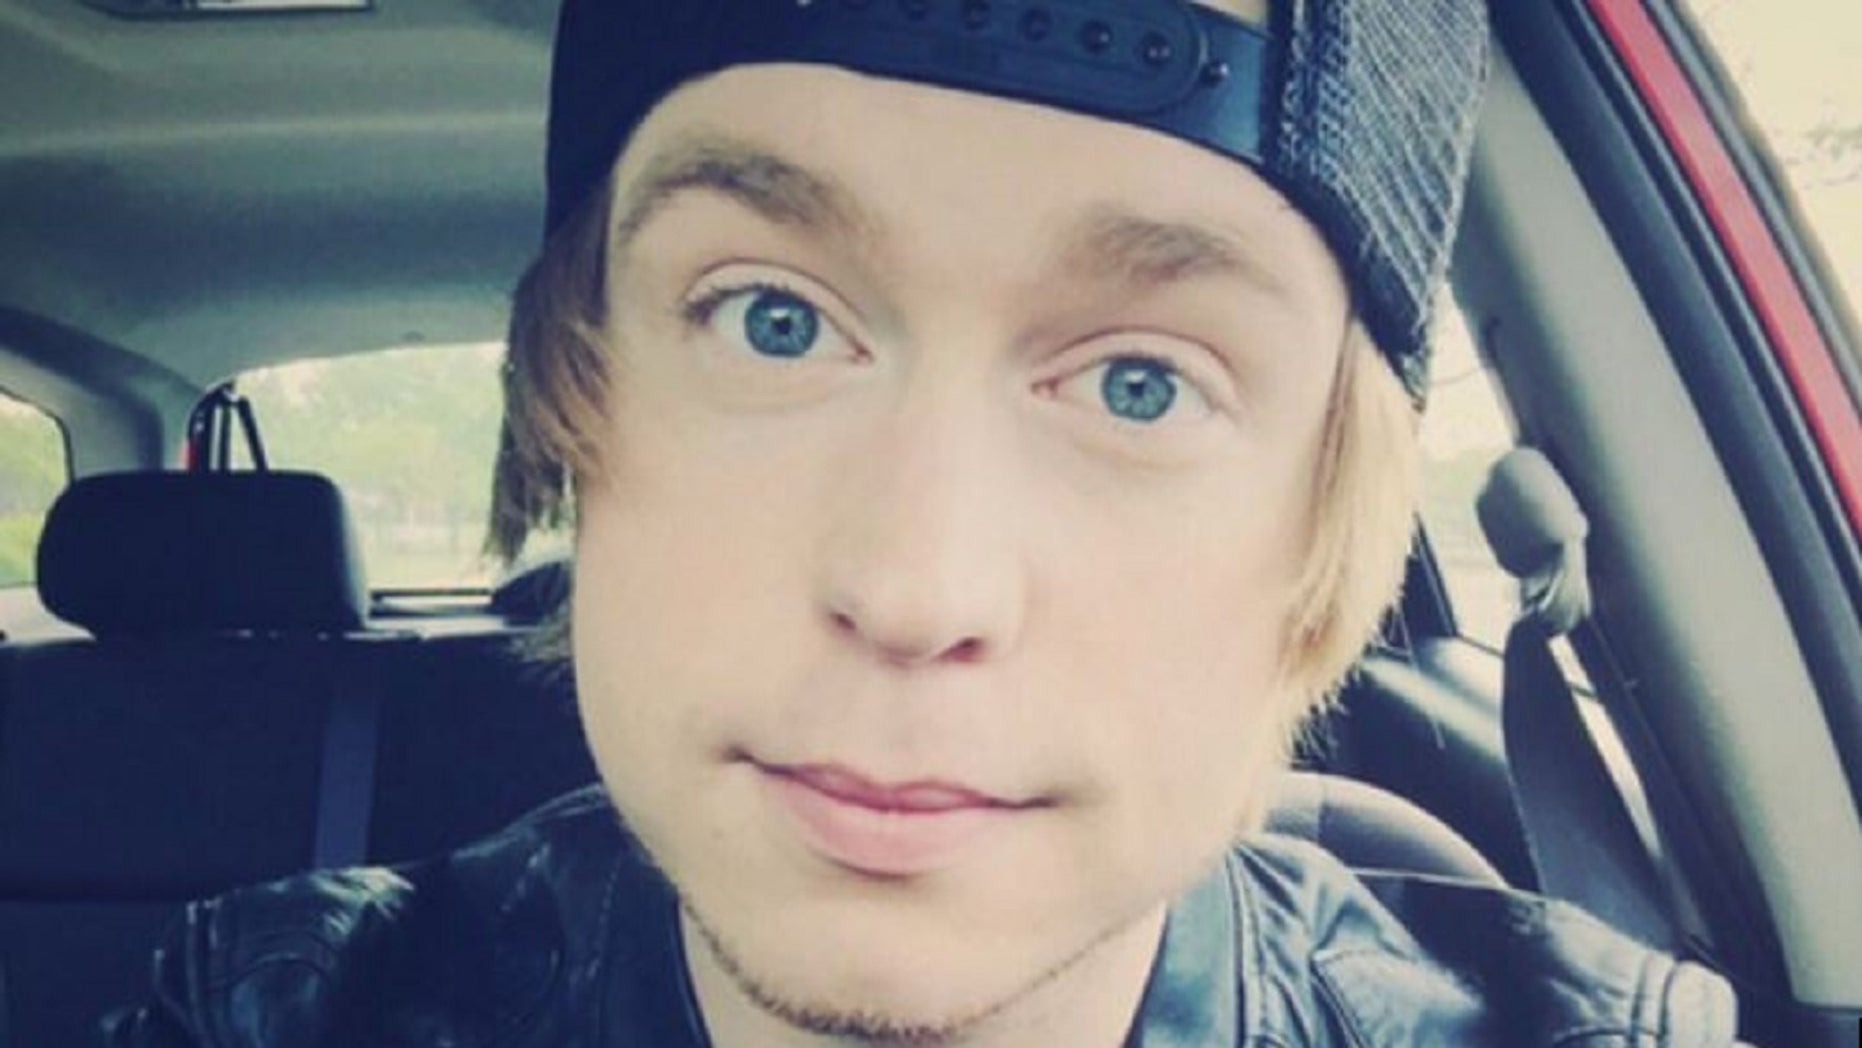 Youtube Star Austin Jones Pleads Guilty To Soliciting Lewd